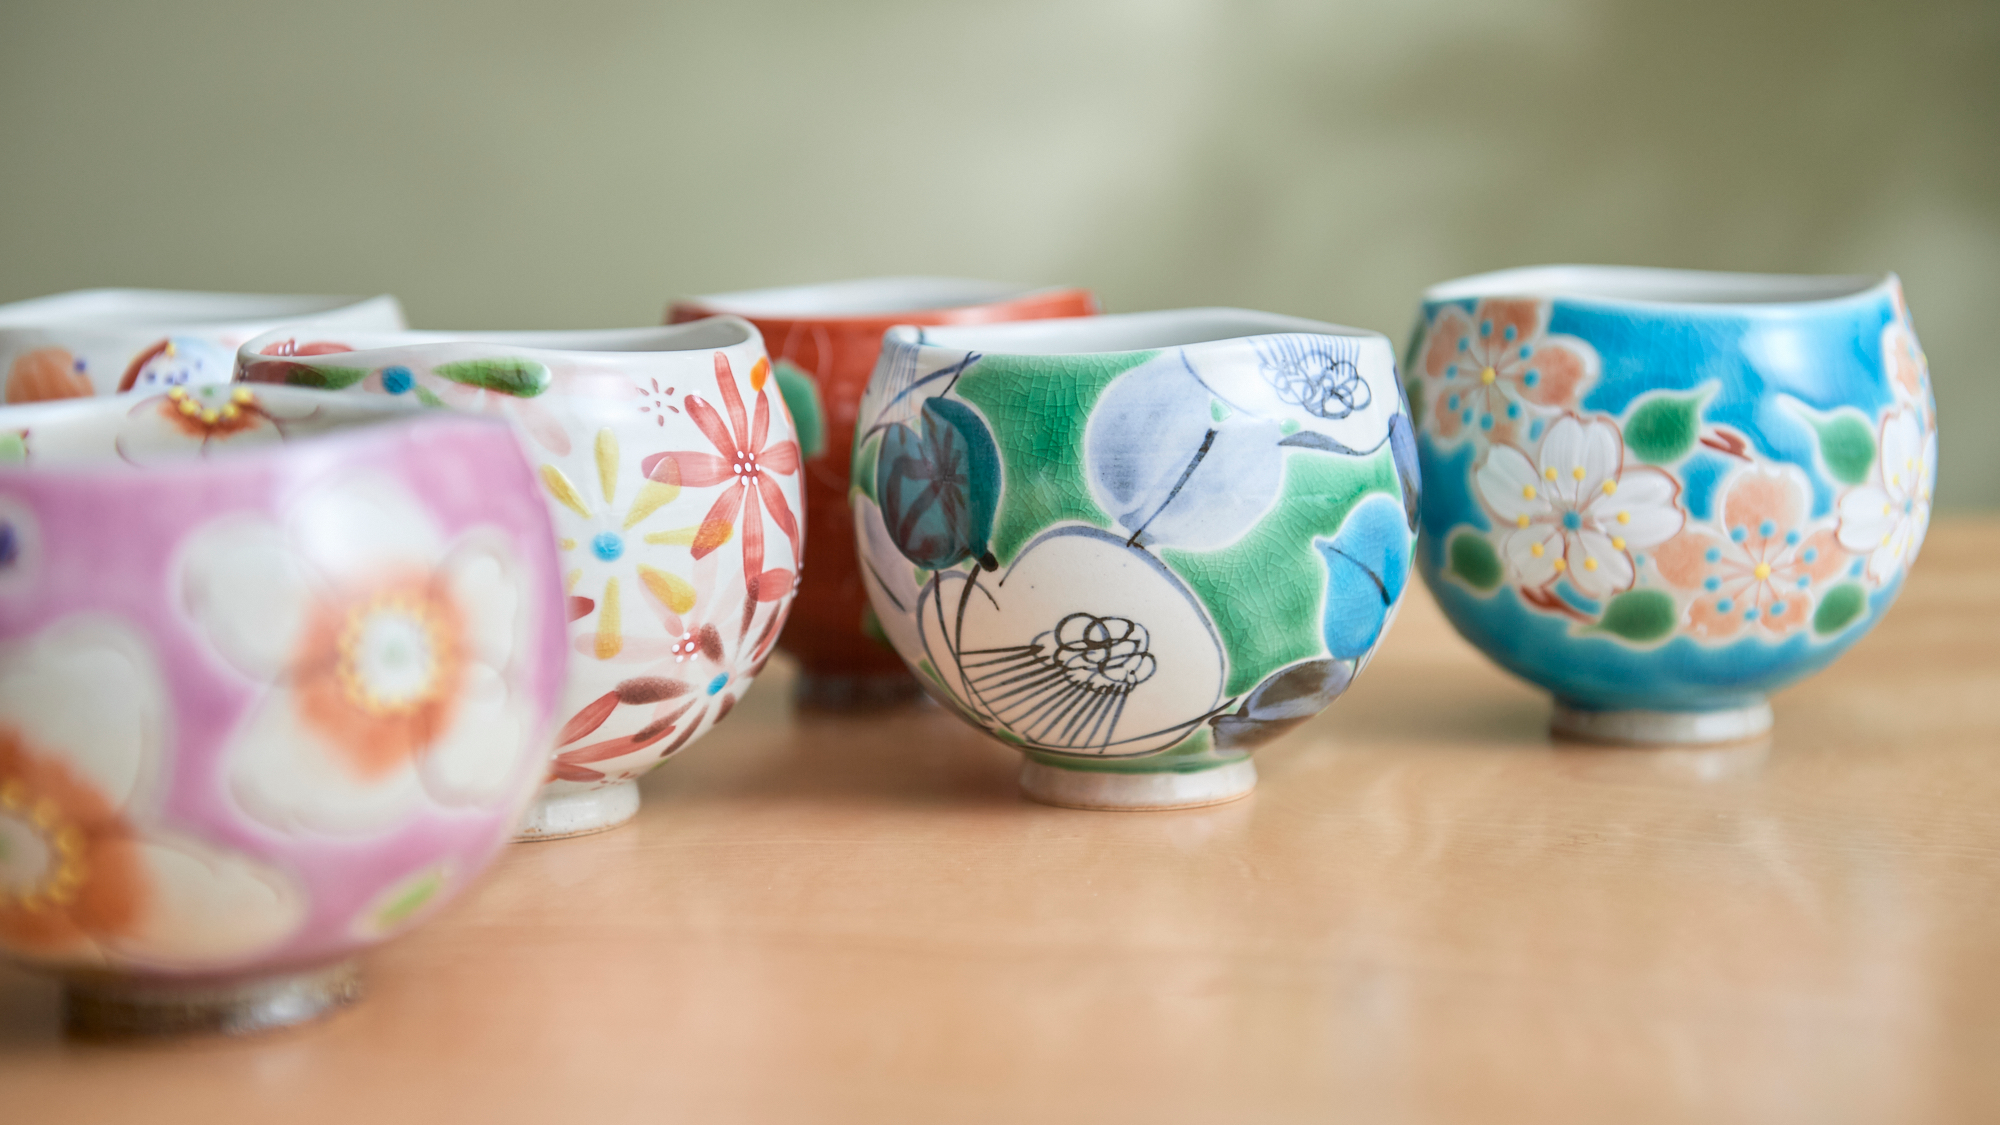 Cupping Blossoms: Large Japanese Teacups with a Floral Embrace